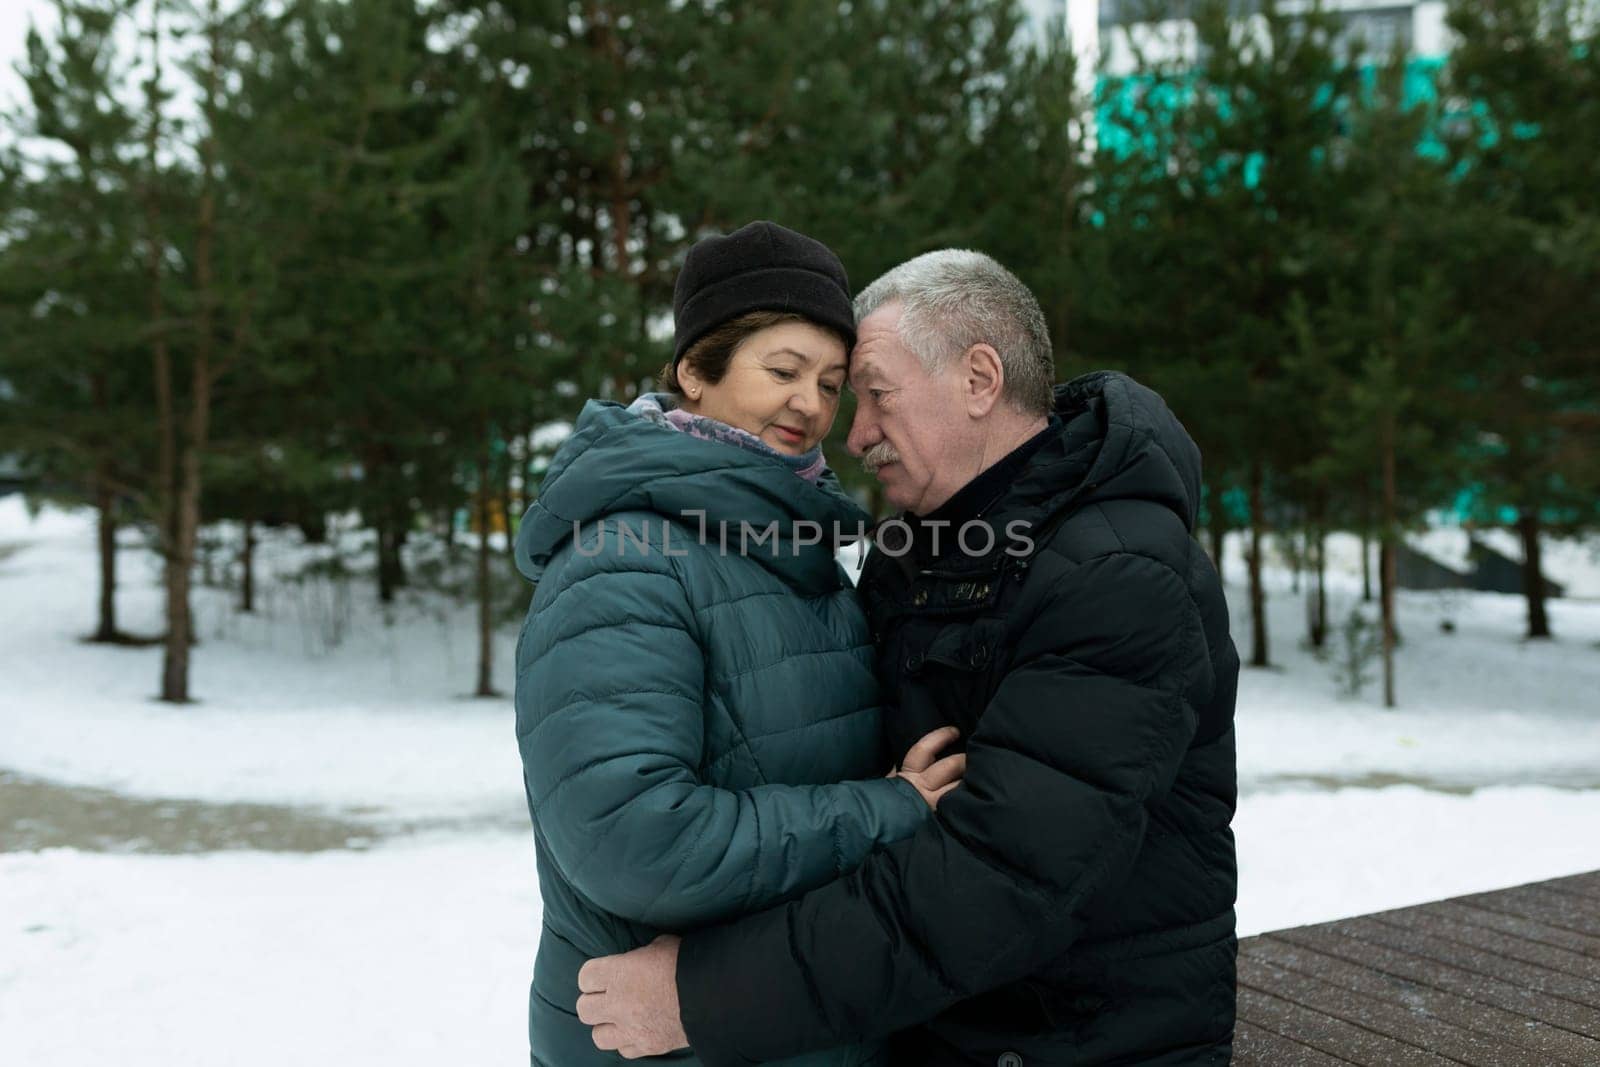 Cute retired couple walking in the park and hugging each other in winter park.